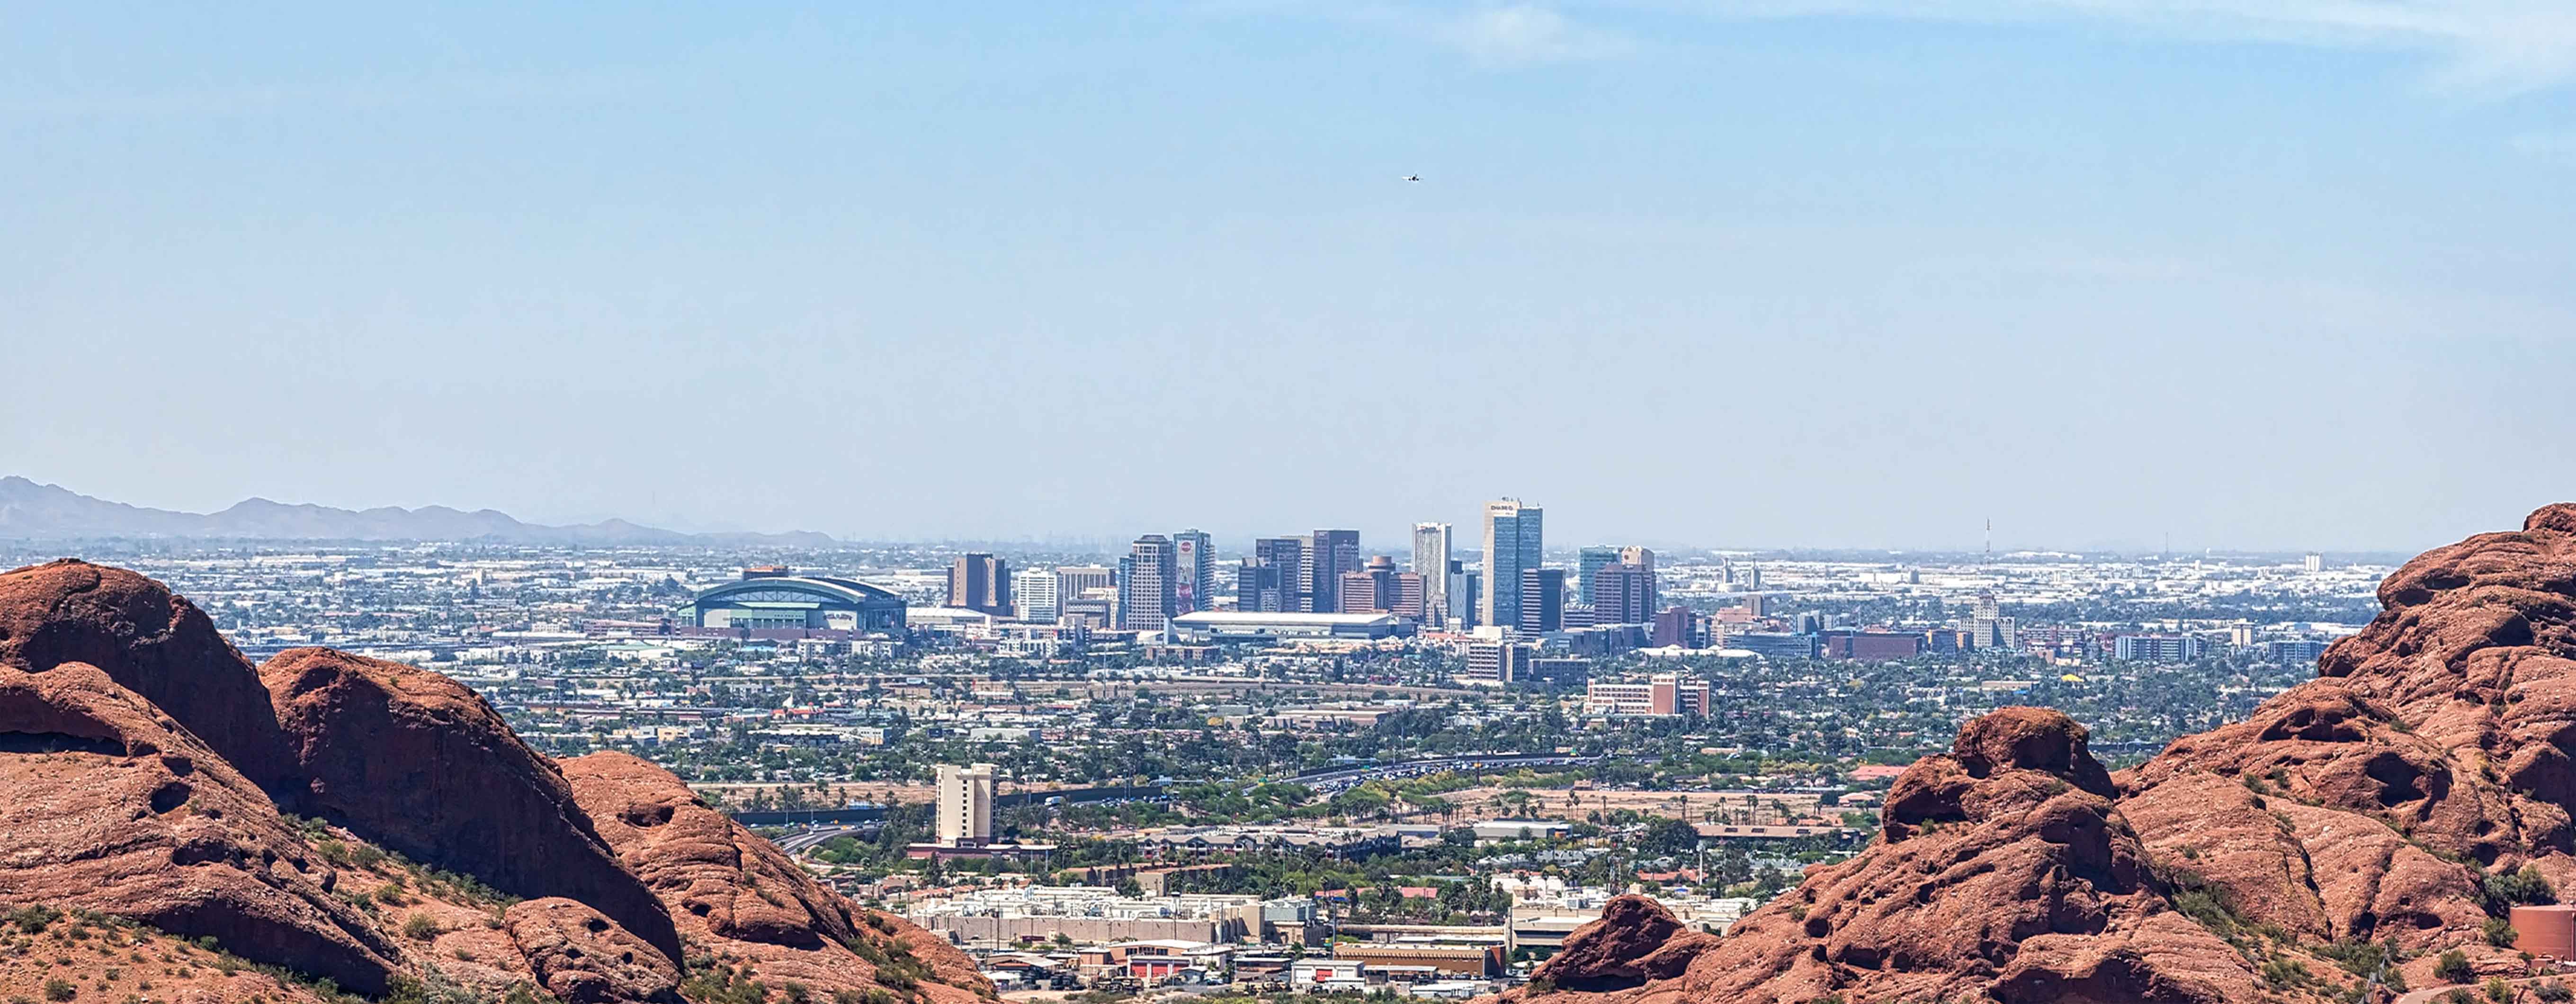 Image of the Phoenix skyline with rocky mountains in the foreground